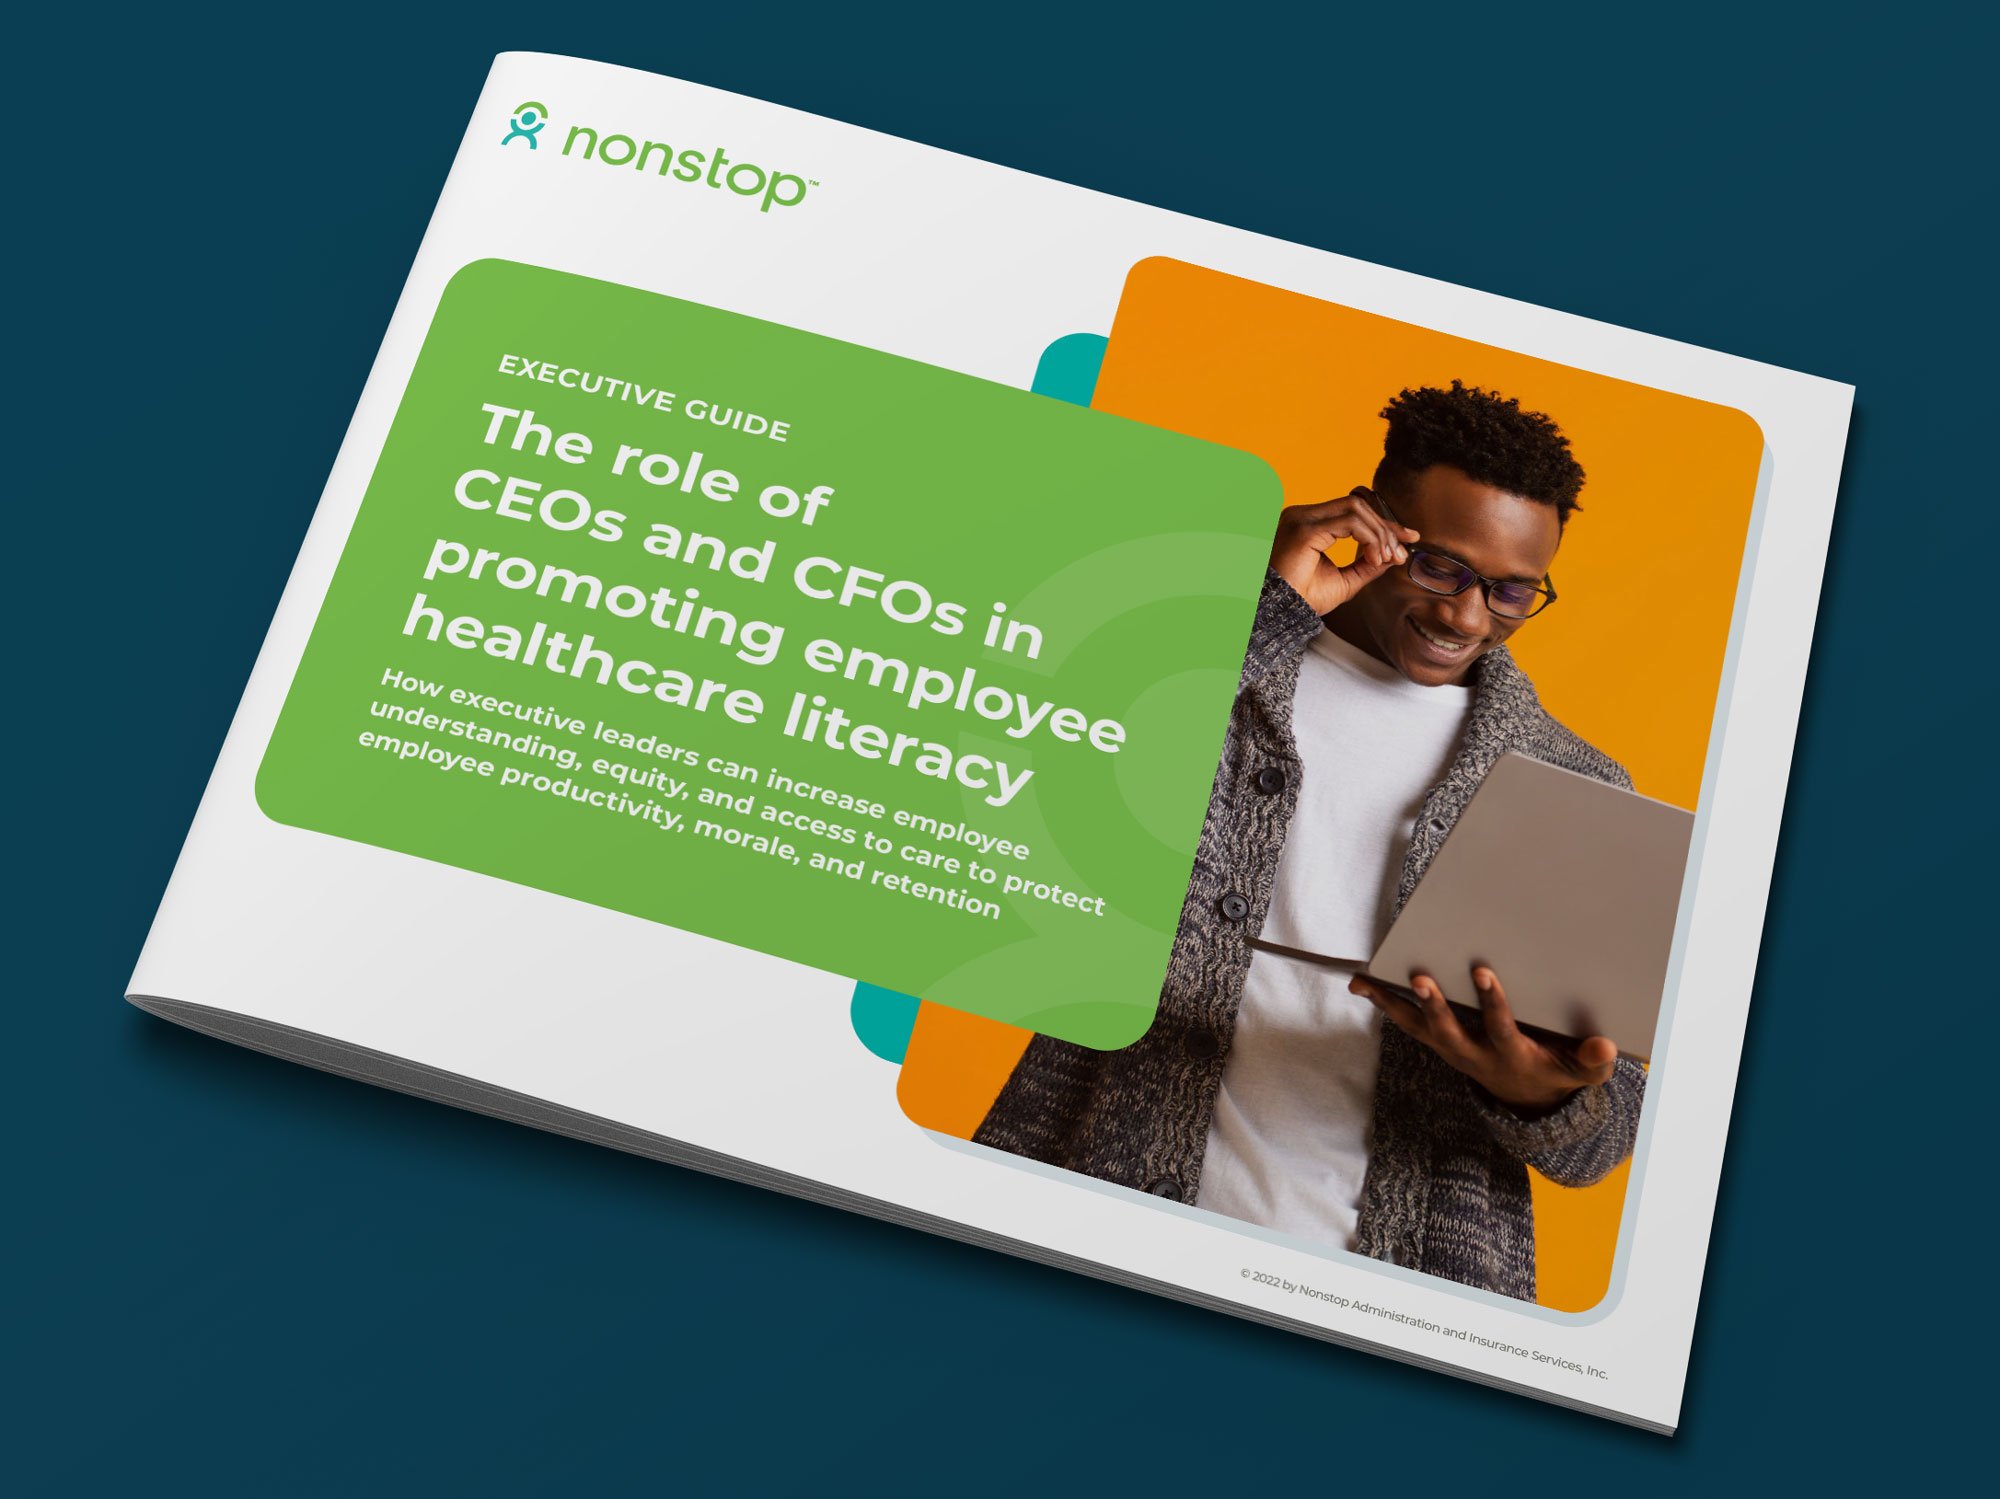 The role of CEOs and CFOs in promoting Employee Healthcare Literacy